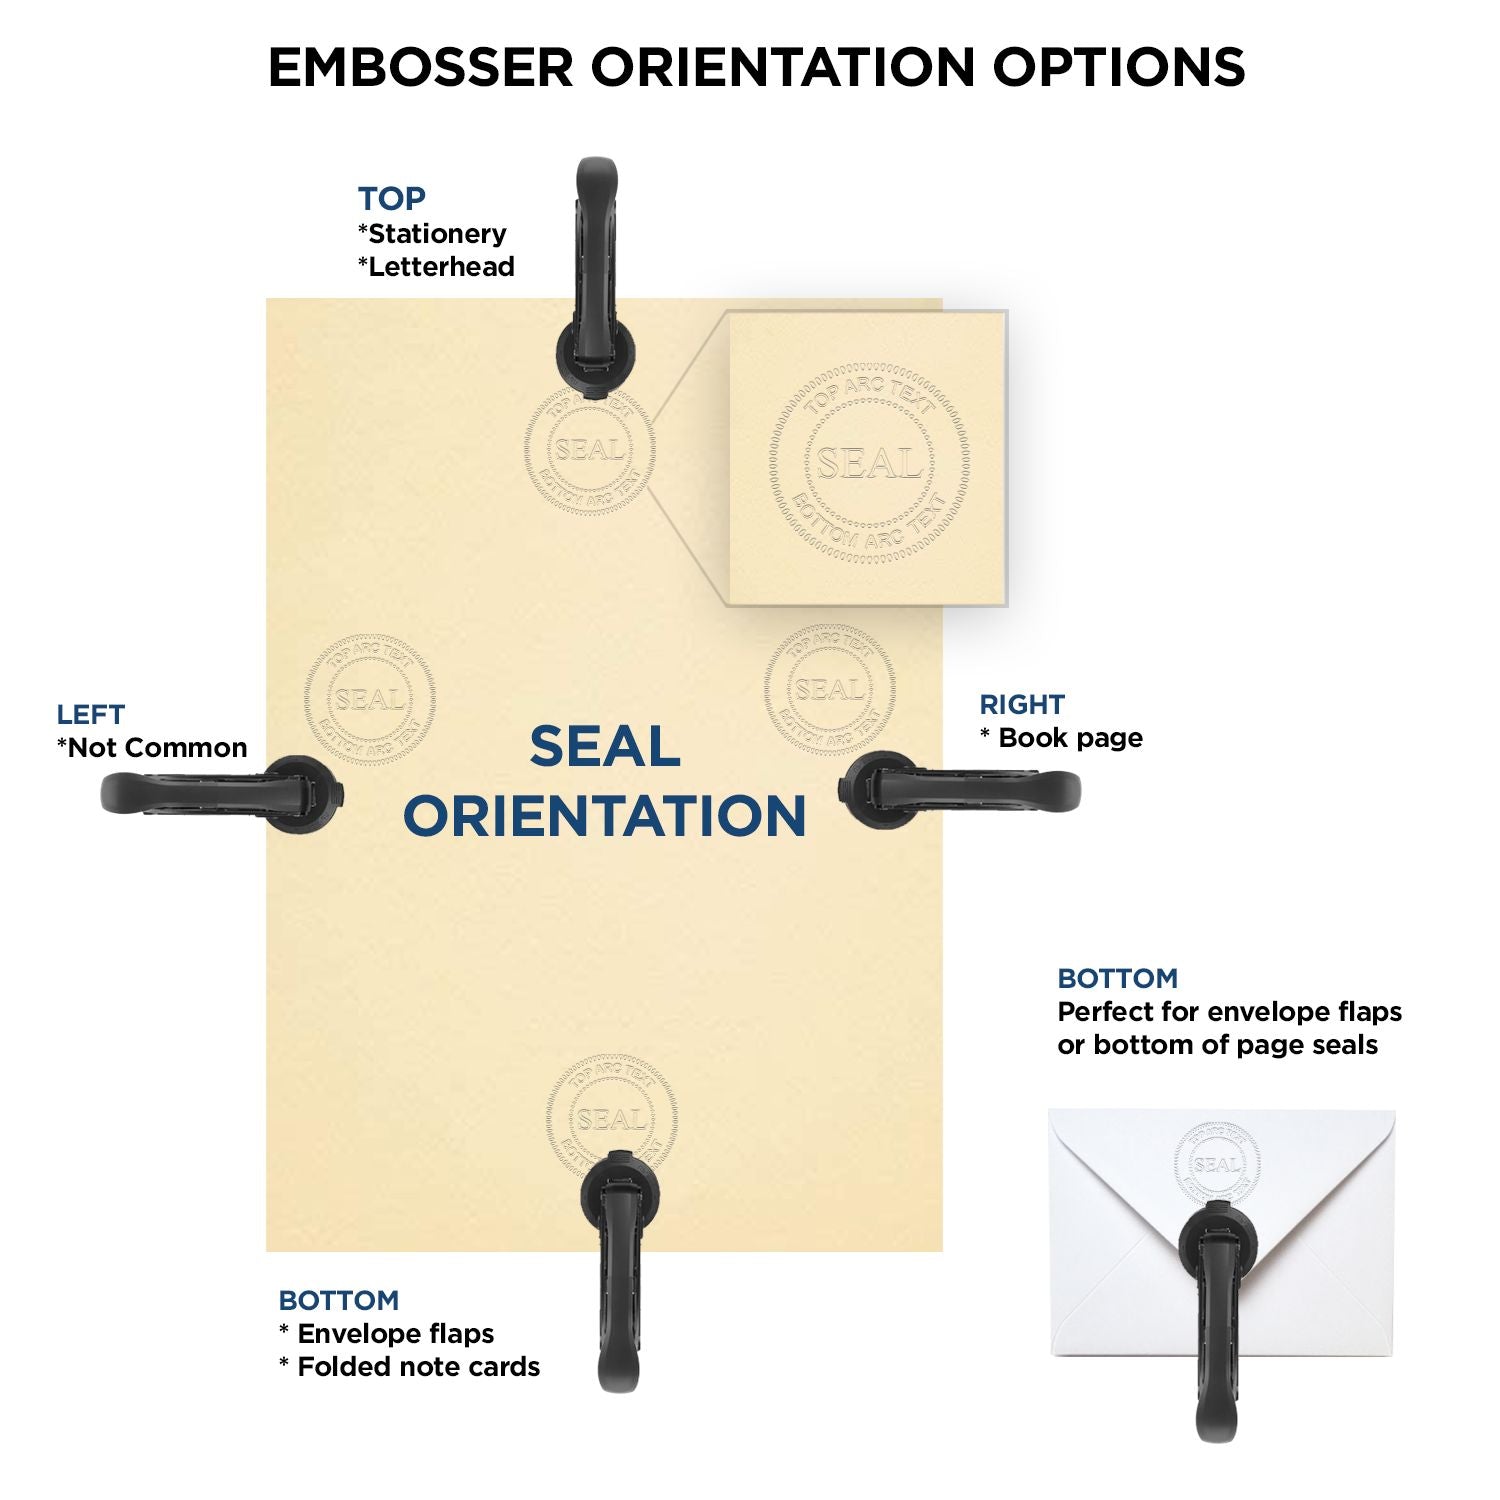 An infographic for the Handheld New Mexico Land Surveyor Seal showing embosser orientation, this is showing examples of a top, bottom, right and left insert.